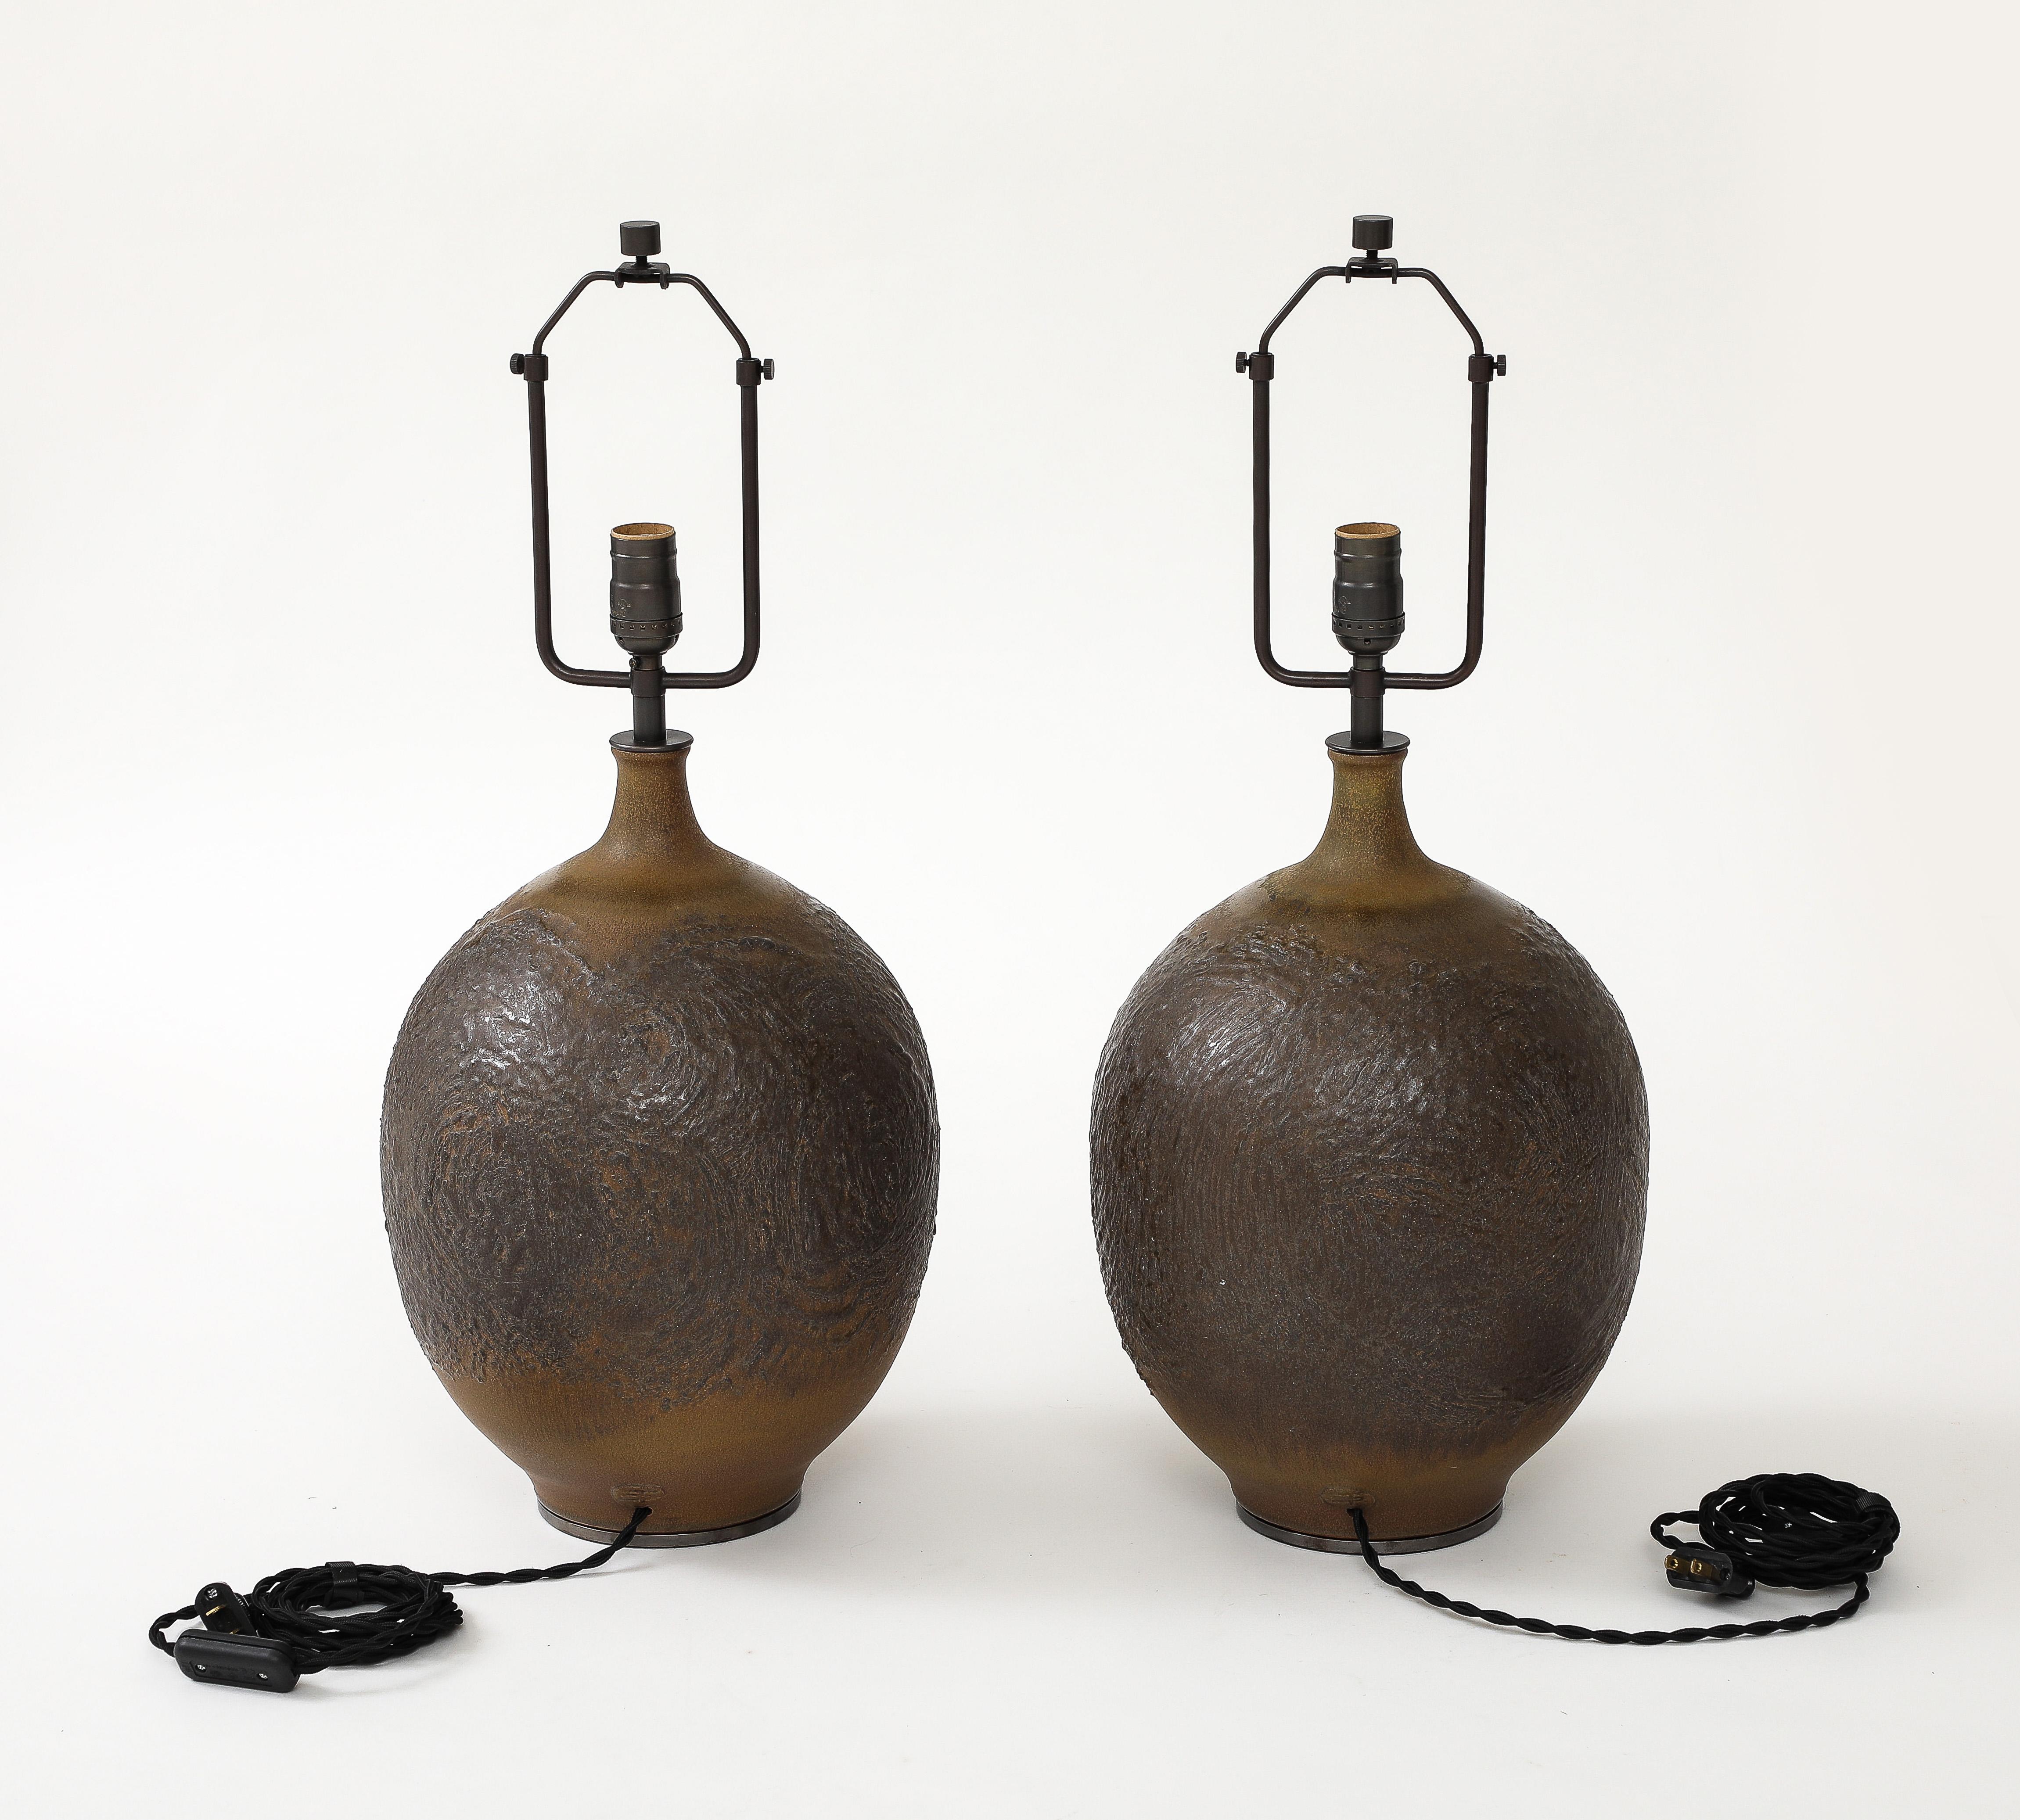 Mid-Century Modern Pair of Glazed Ceramic Lamps by Design Technics, United States, c. 1950 For Sale